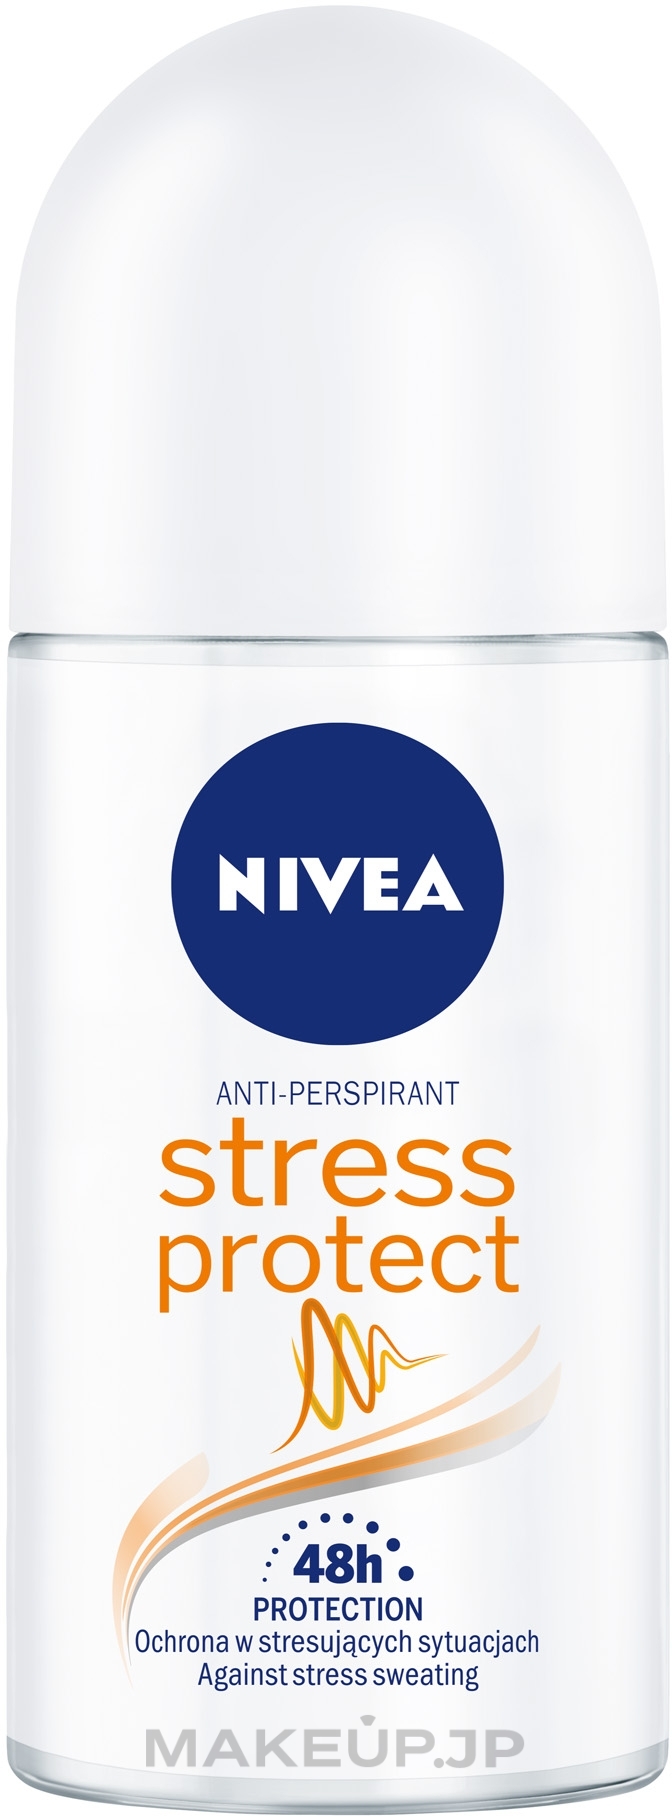 Roll-on Deodorant Antiperspirant "Stress Protect" - NIVEA Stress Protect Roll-On for Women — photo 50 ml